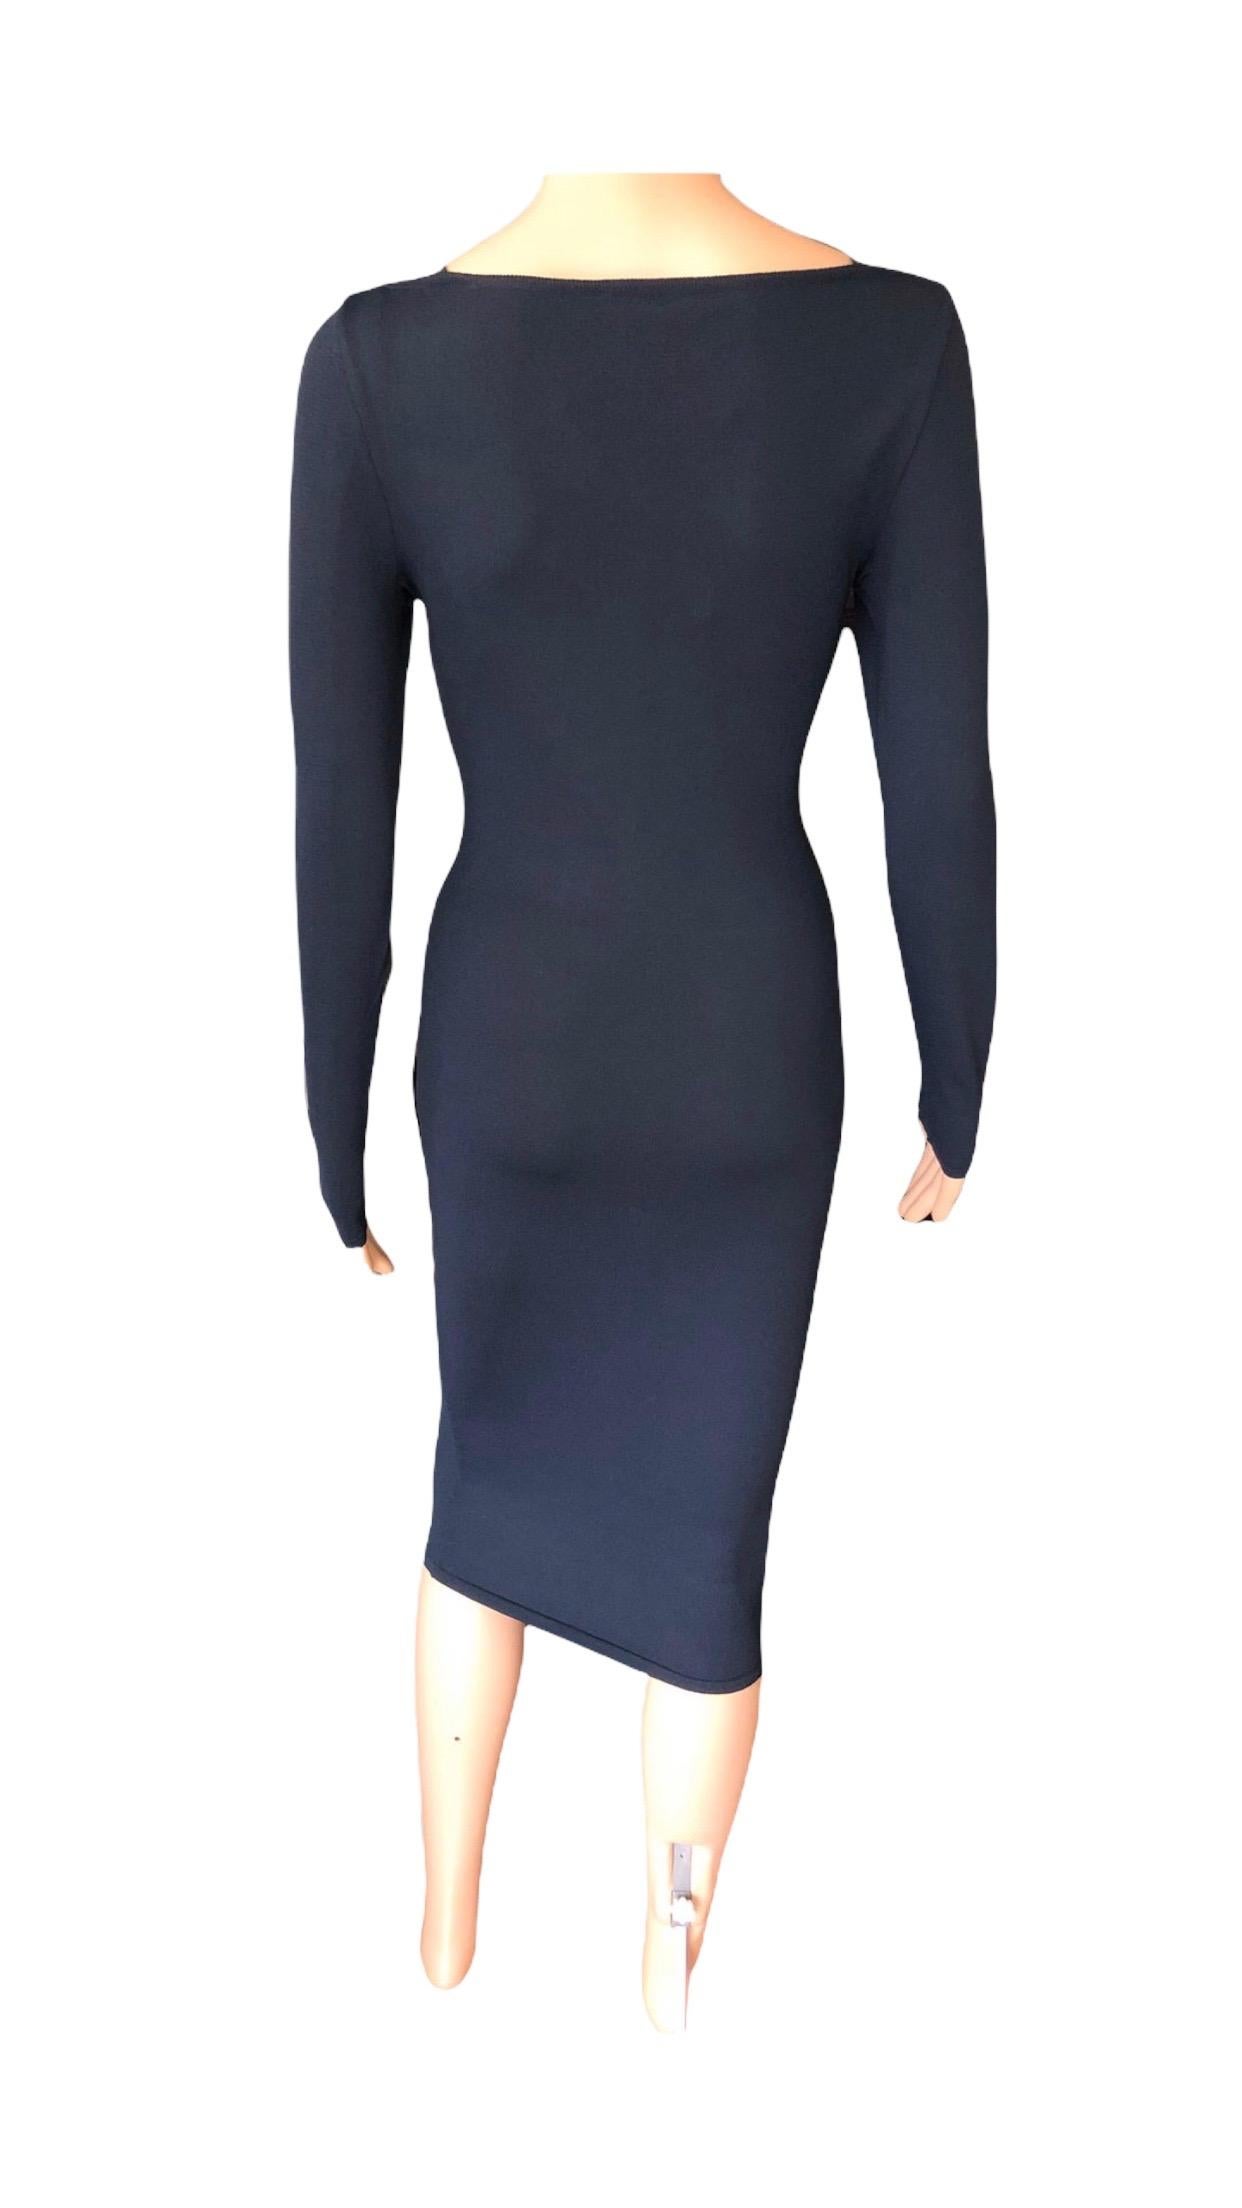 Tom Ford for Gucci S/S 1998 Vintage Bodycon Knit Midi Dress 7